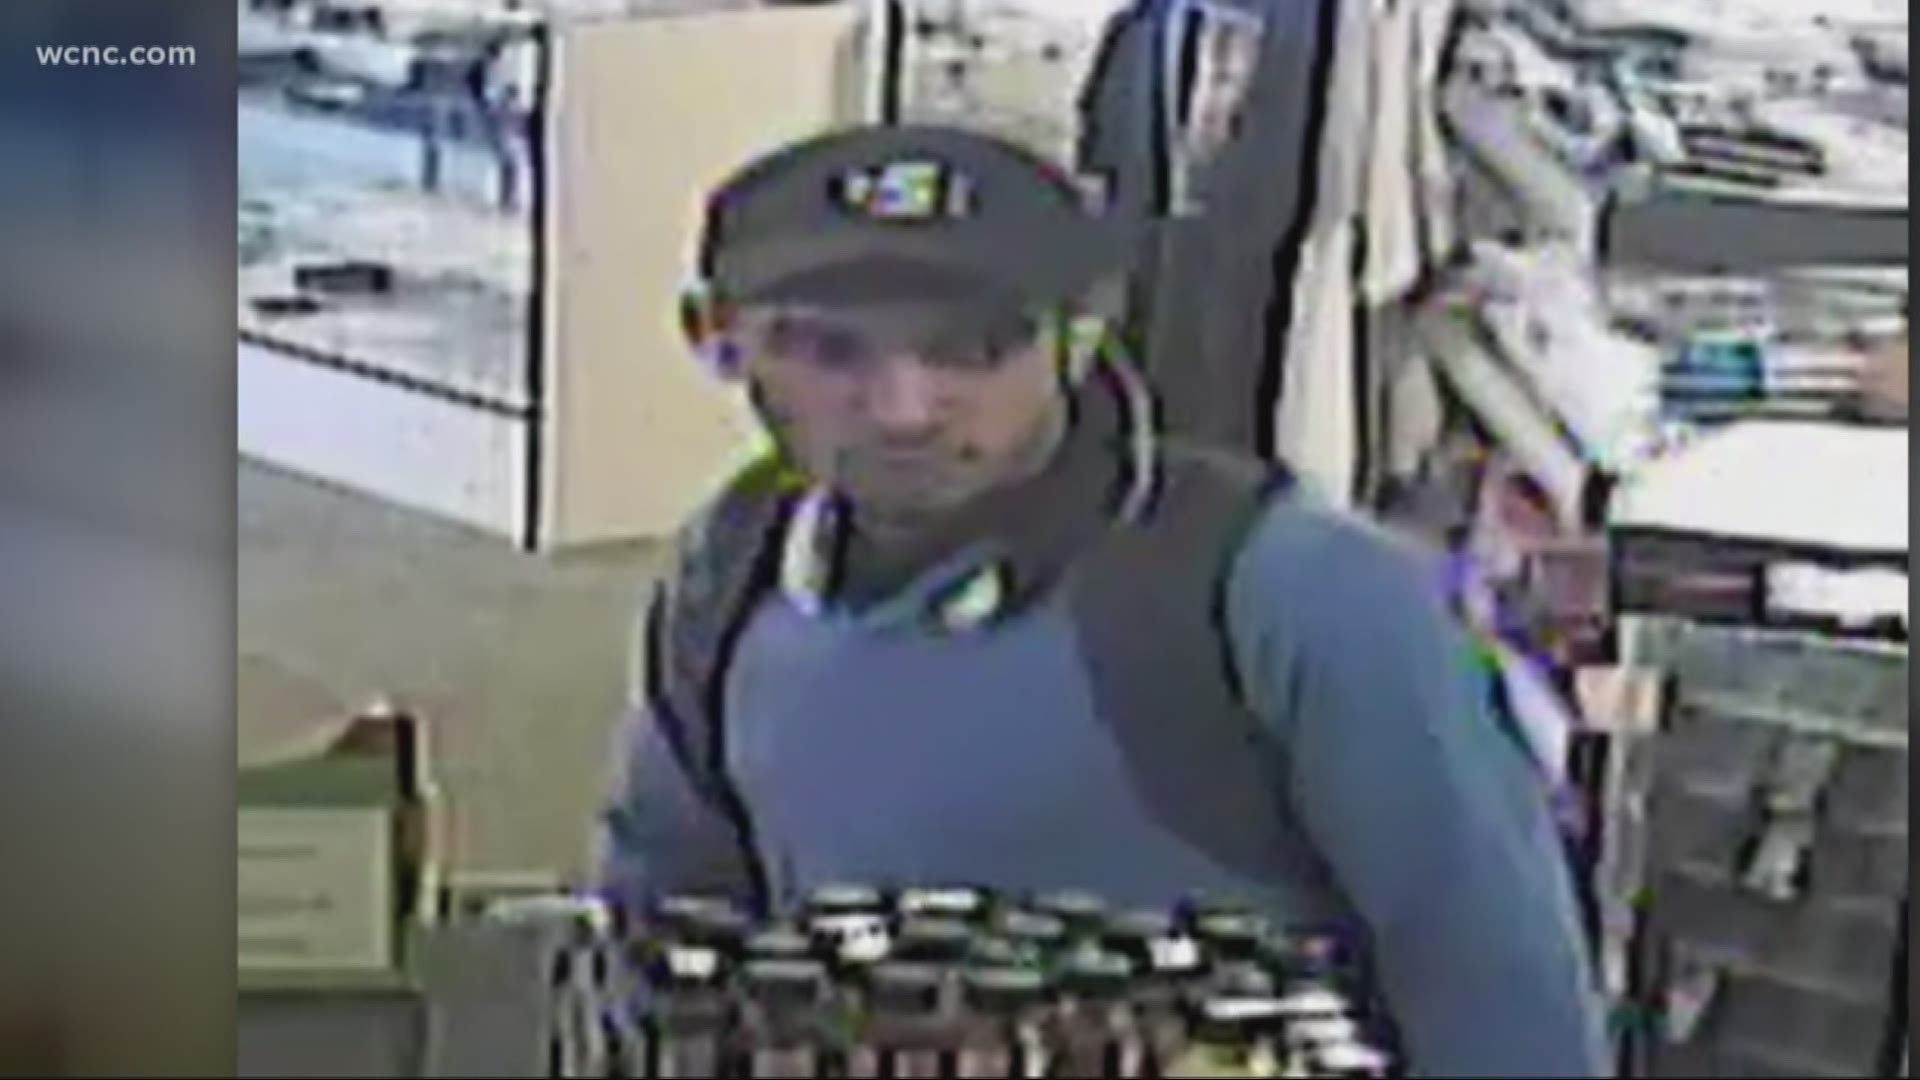 New pictures released of smoke shop suspect